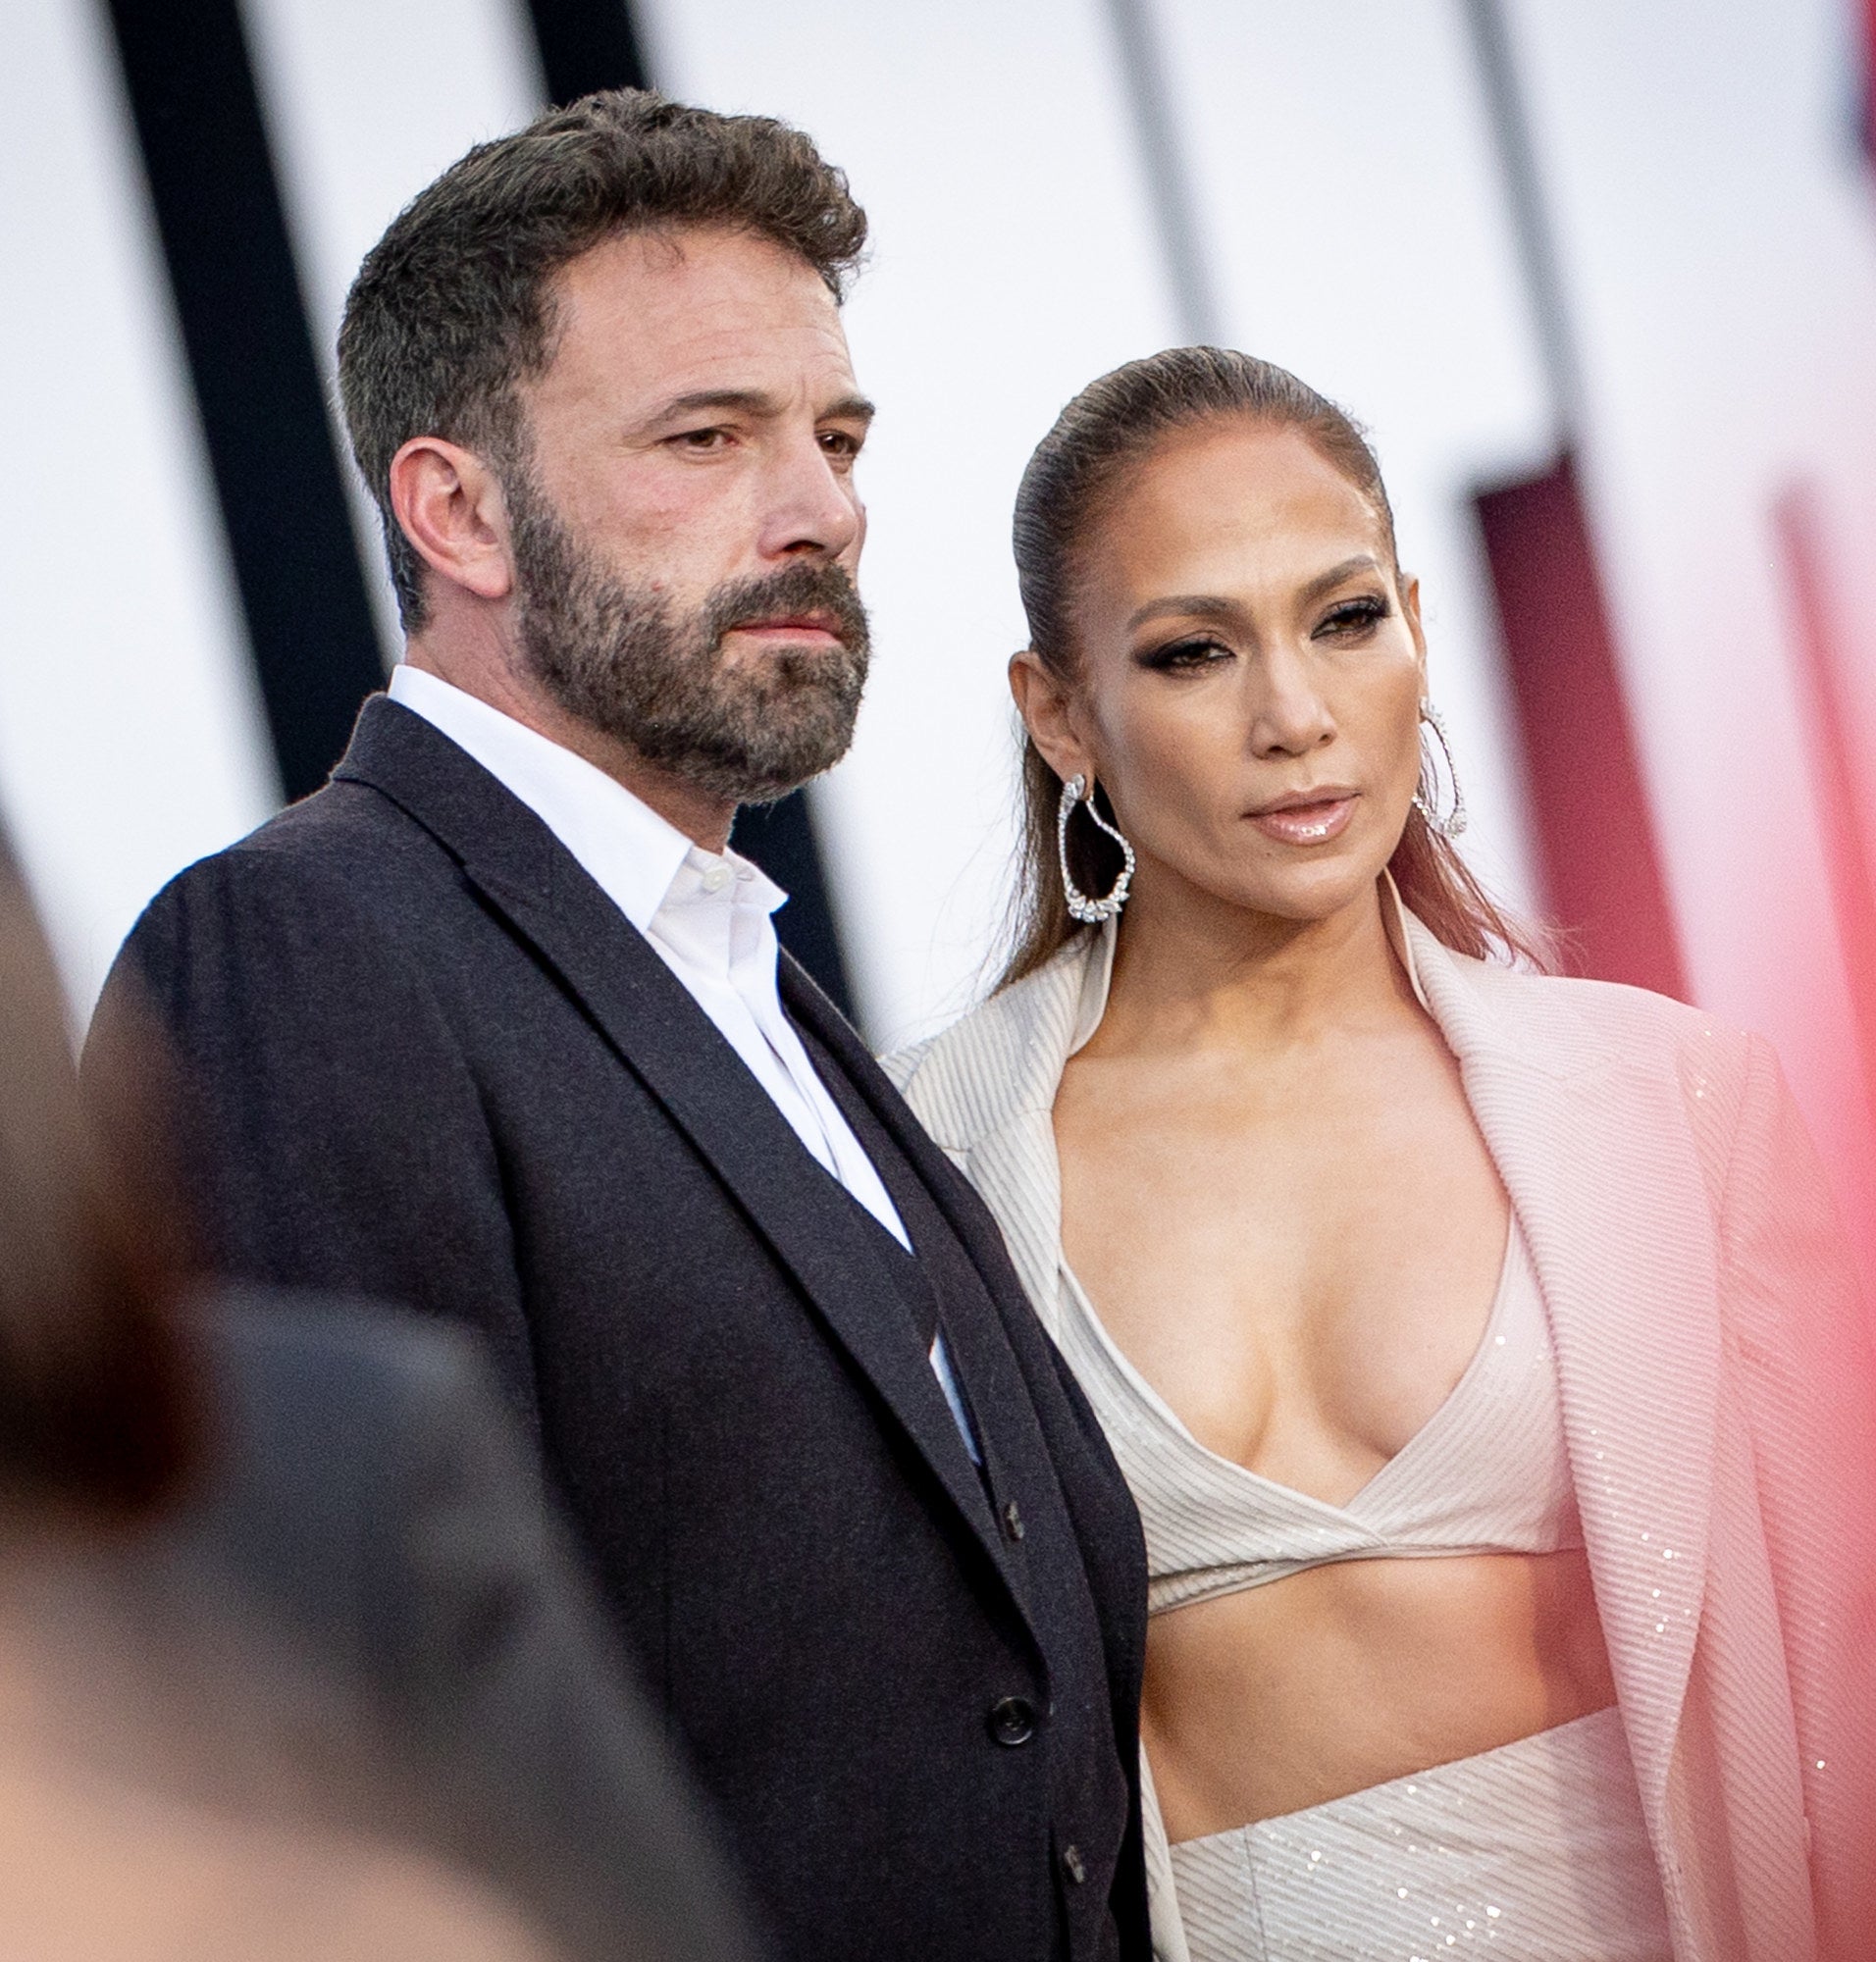 Ben and JLo looking serious